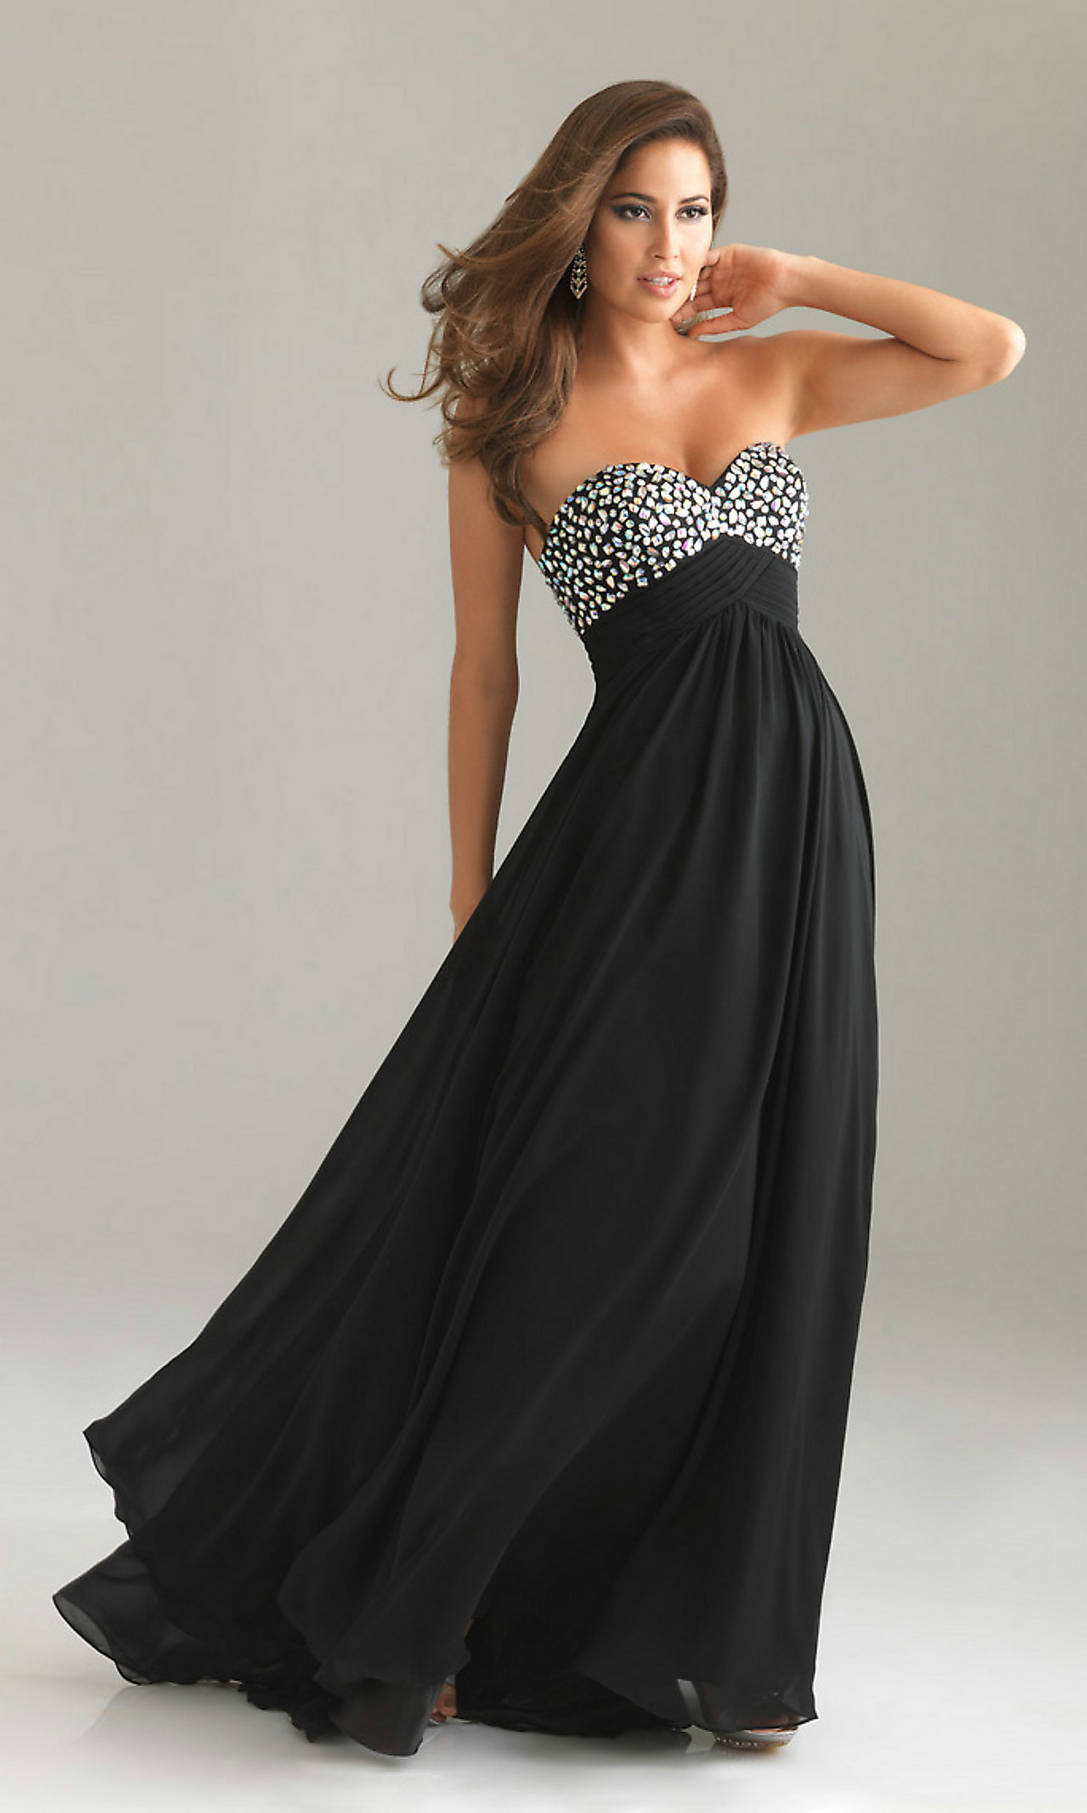 Black Evening Dresses - A Numerous Tendency - Ohh My My